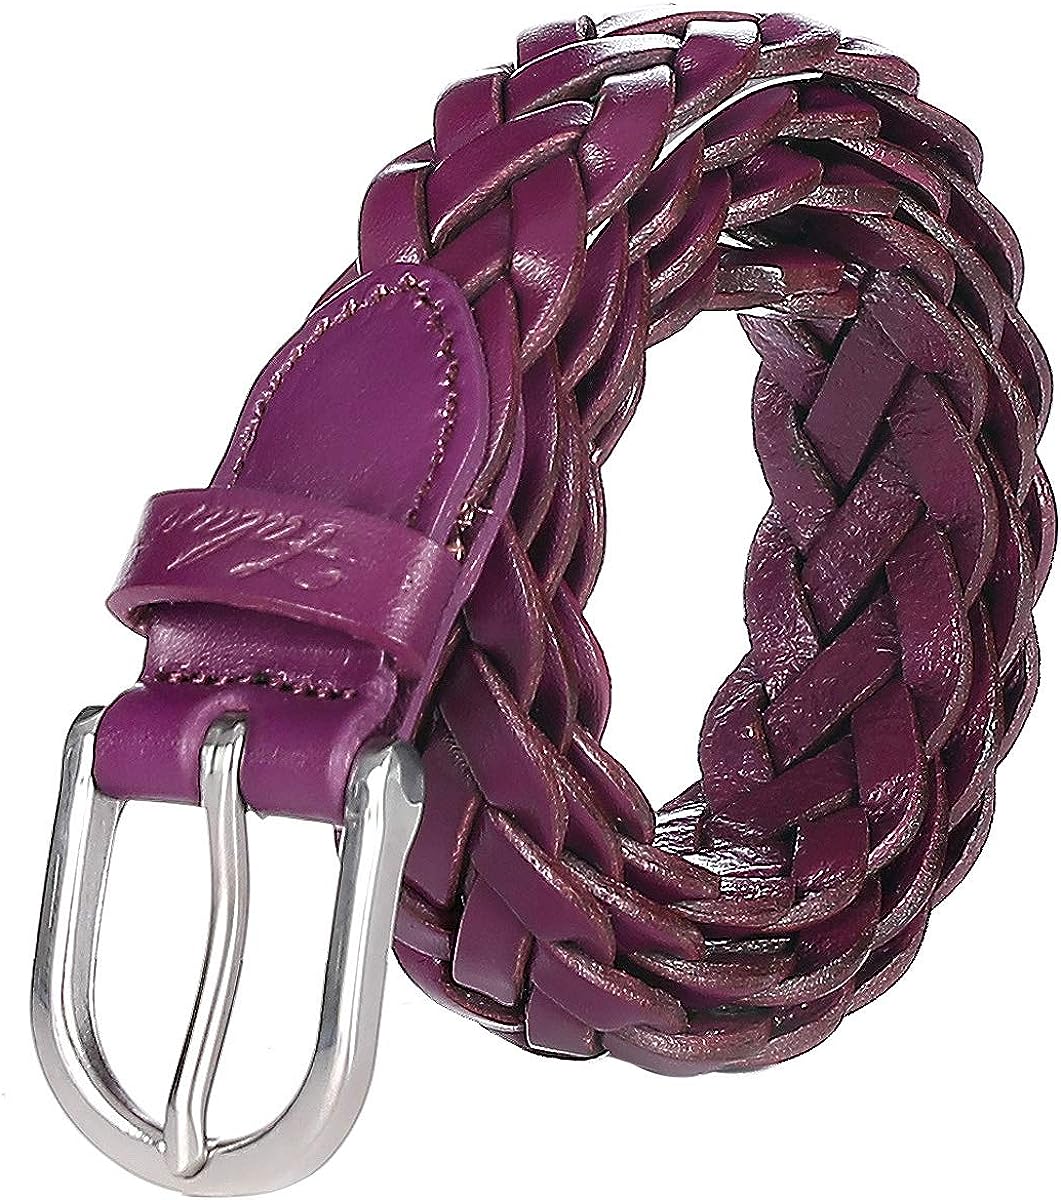 Falari Women's Leather Hand Braided Belt Stainless Steel Buckle